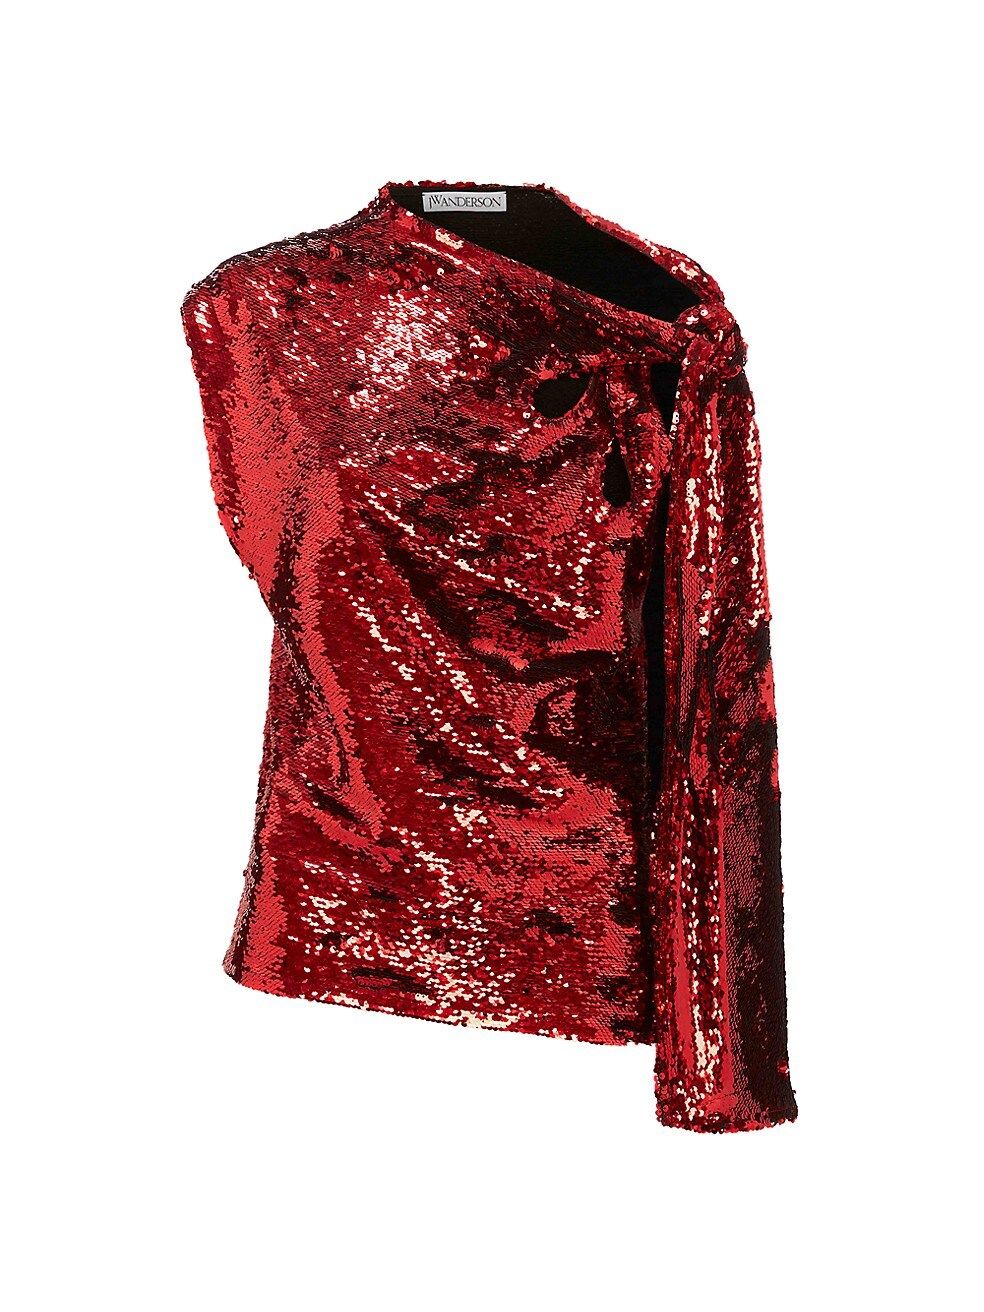 JW Anderson Sequined Asymmetric Top | Saks Fifth Avenue